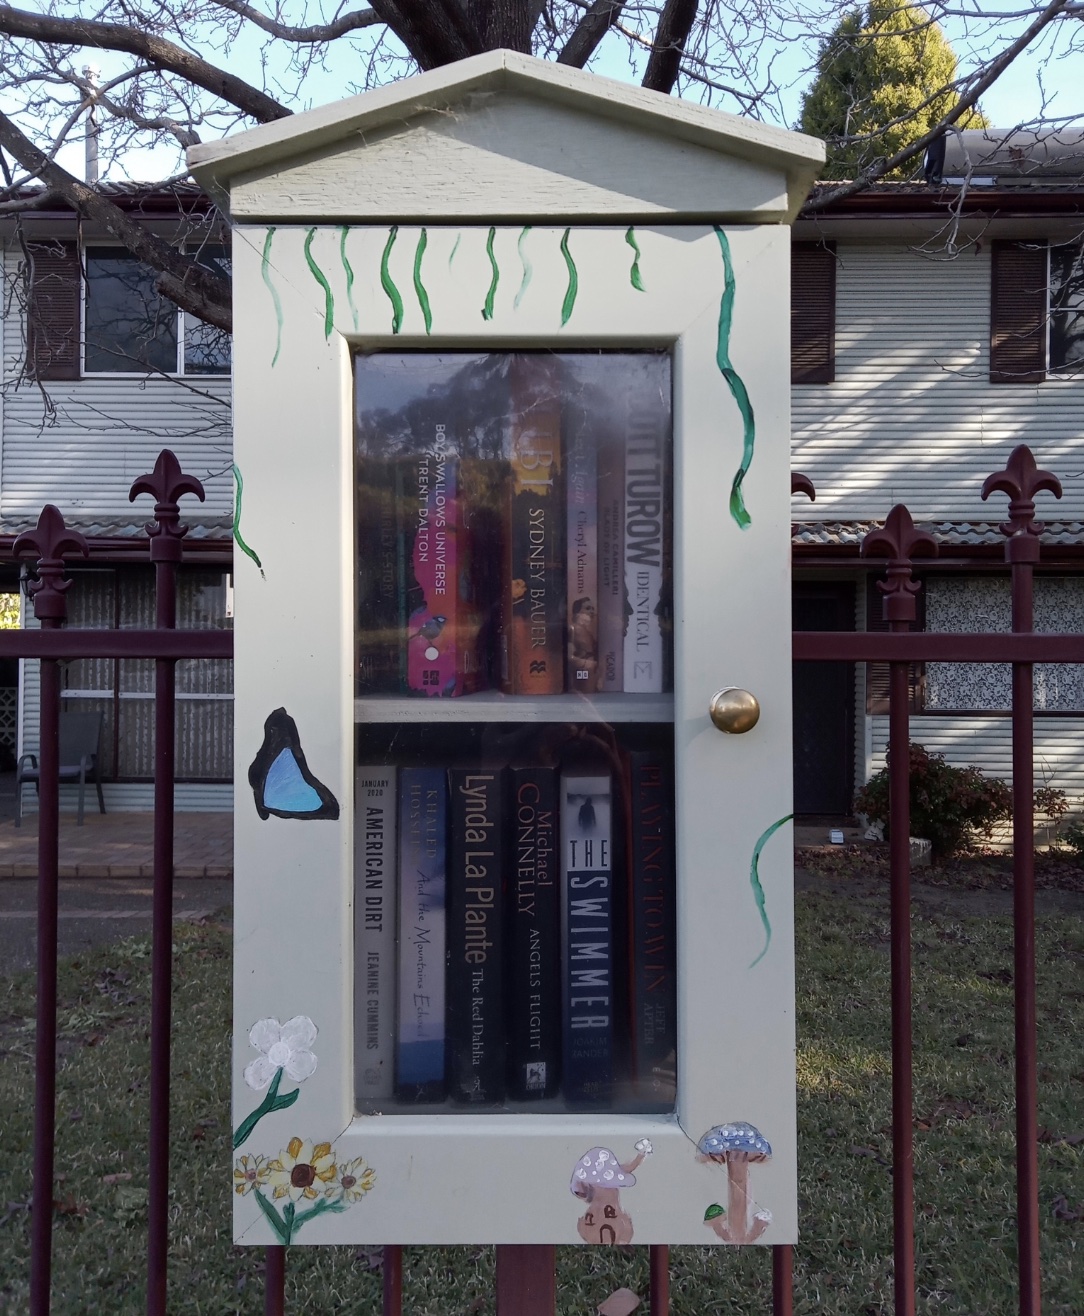 A bespoke Street Library decorated with mushrooms and butterflies.